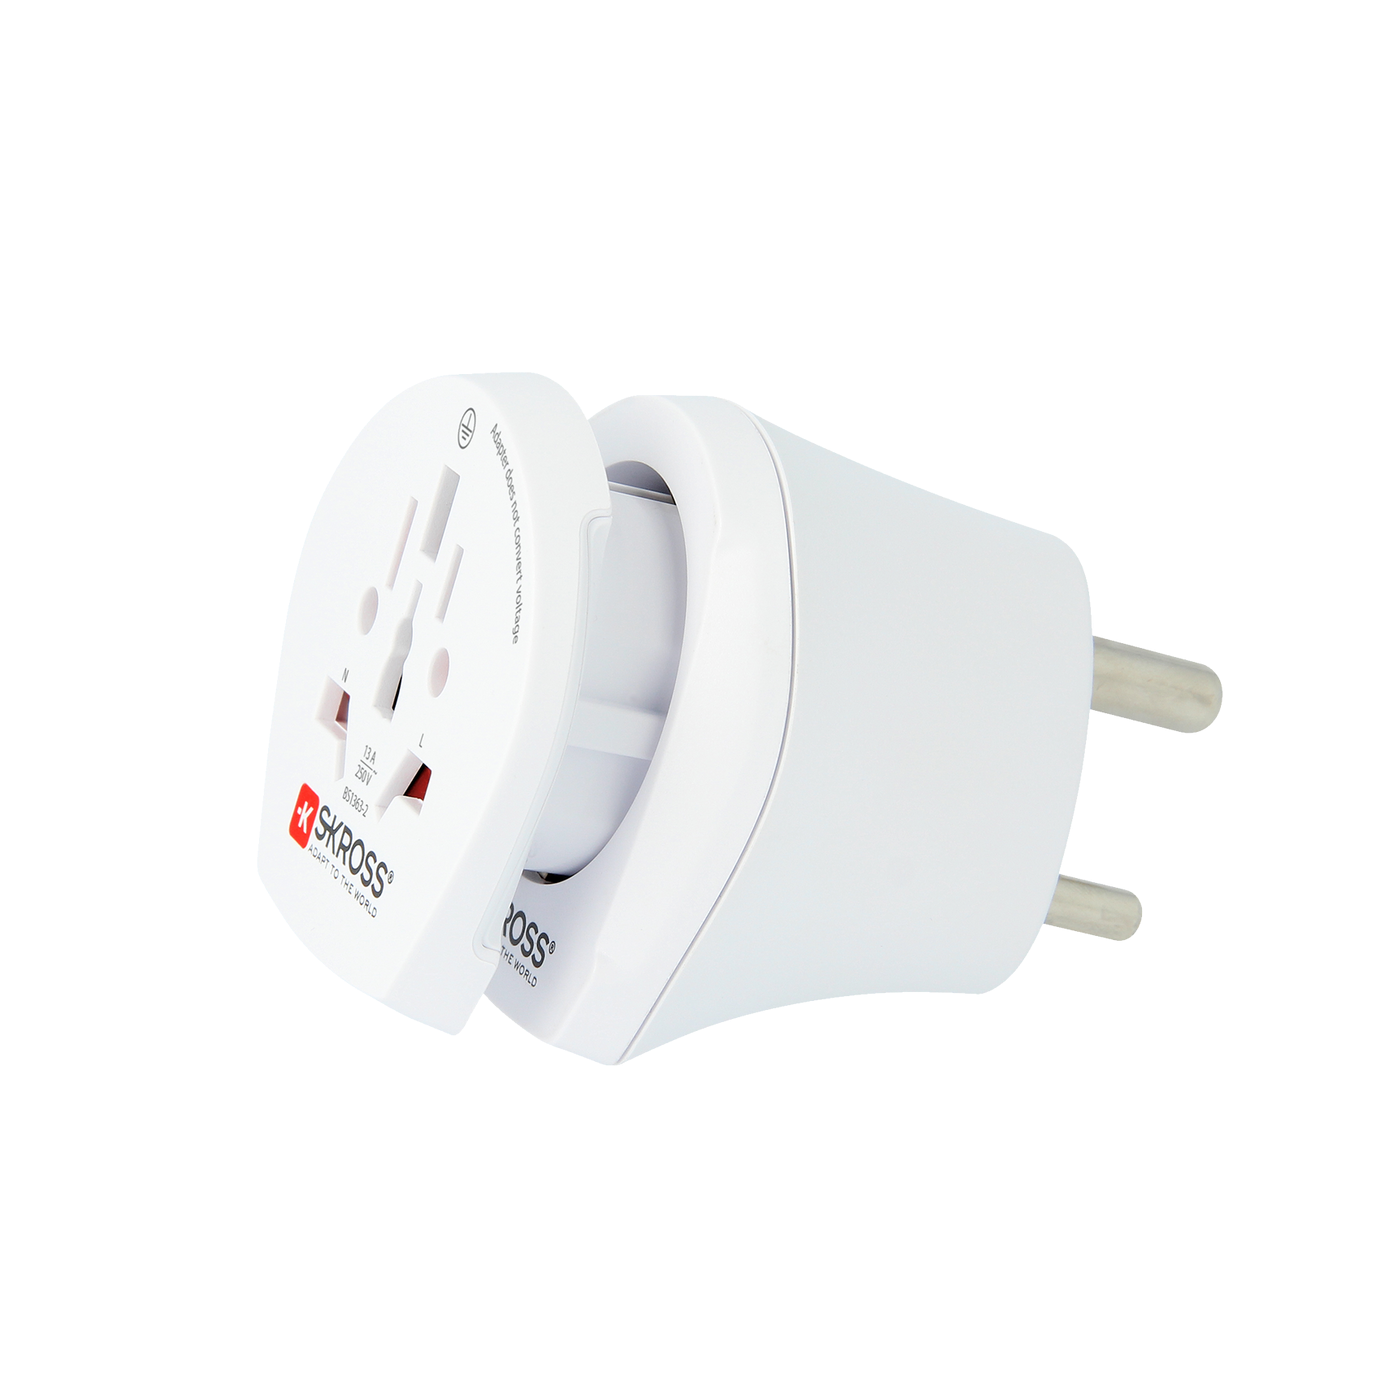 Skross Combo World to India travel adapter side on